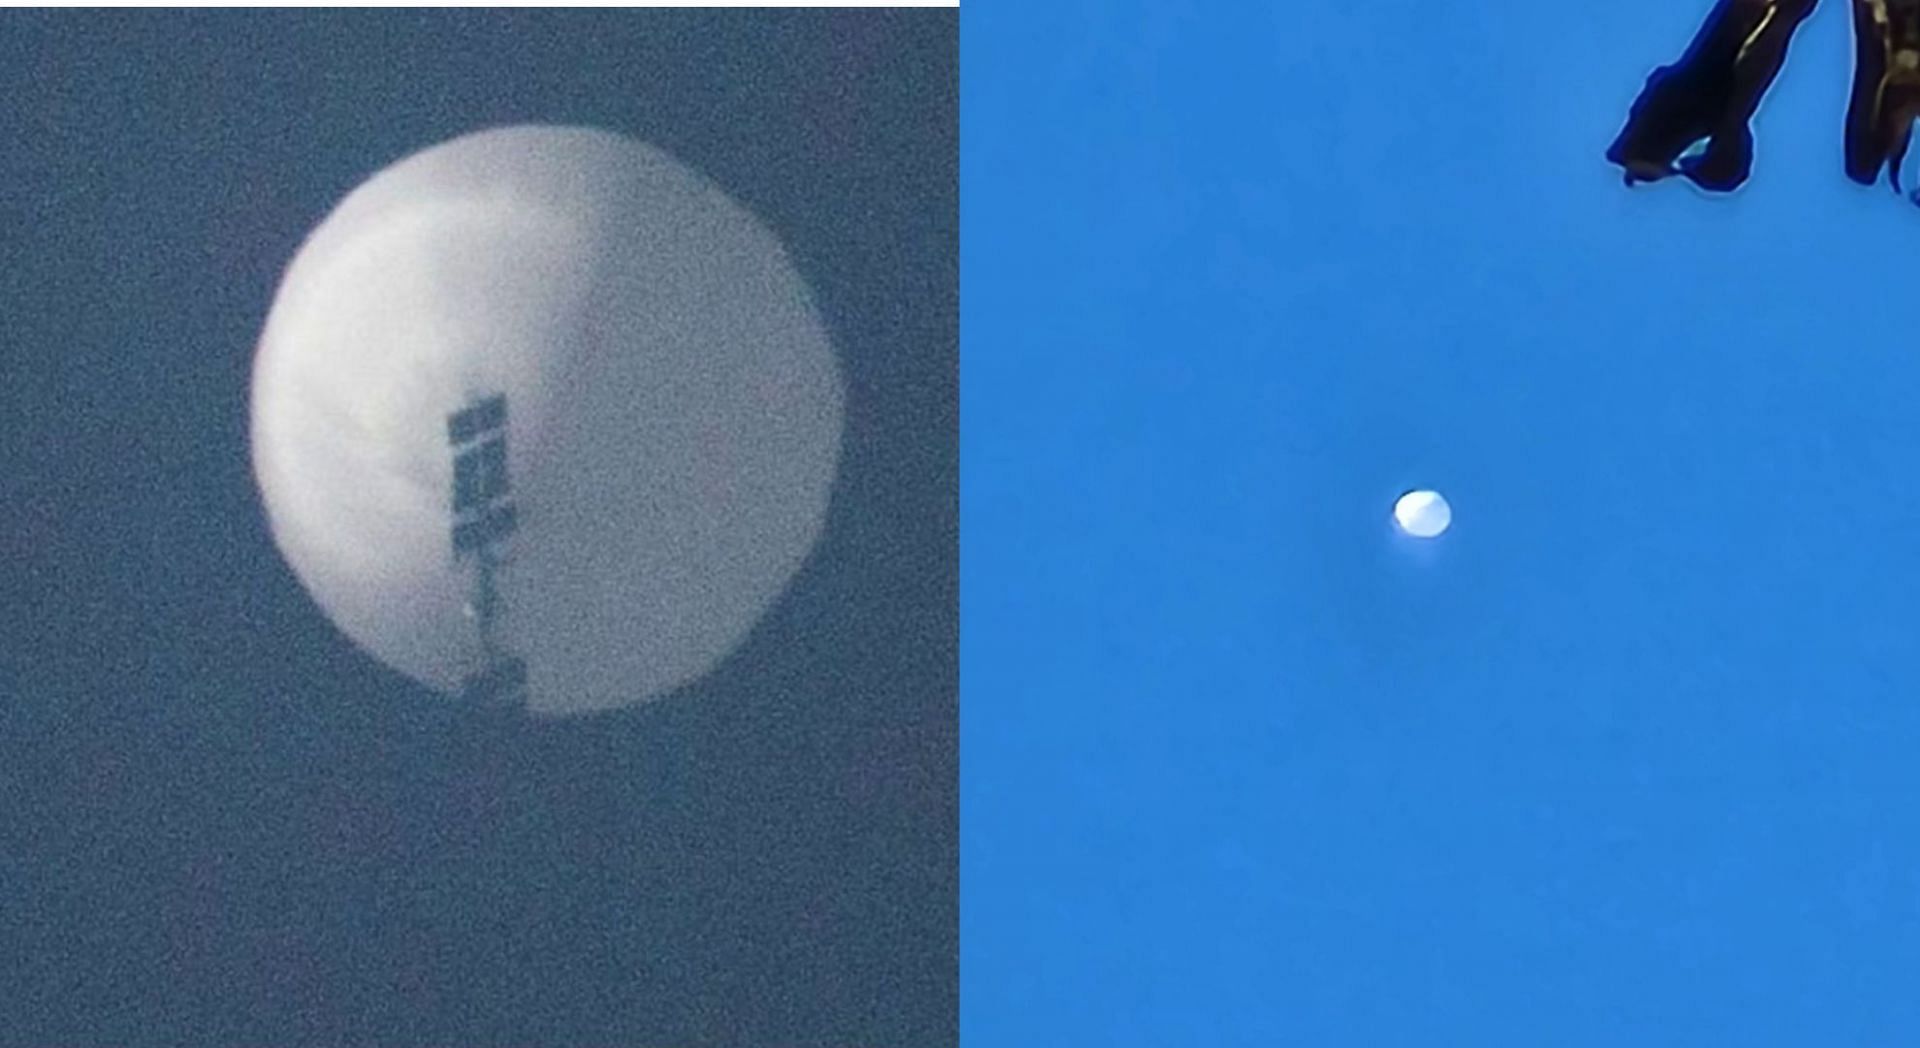 Beijing said that the Chinese spy balloon looming over the U.S. was being used for &quot;meteorological research&quot; (Image via Rob Schneider/Twitter and Marcus Hubbard/Twirrer)